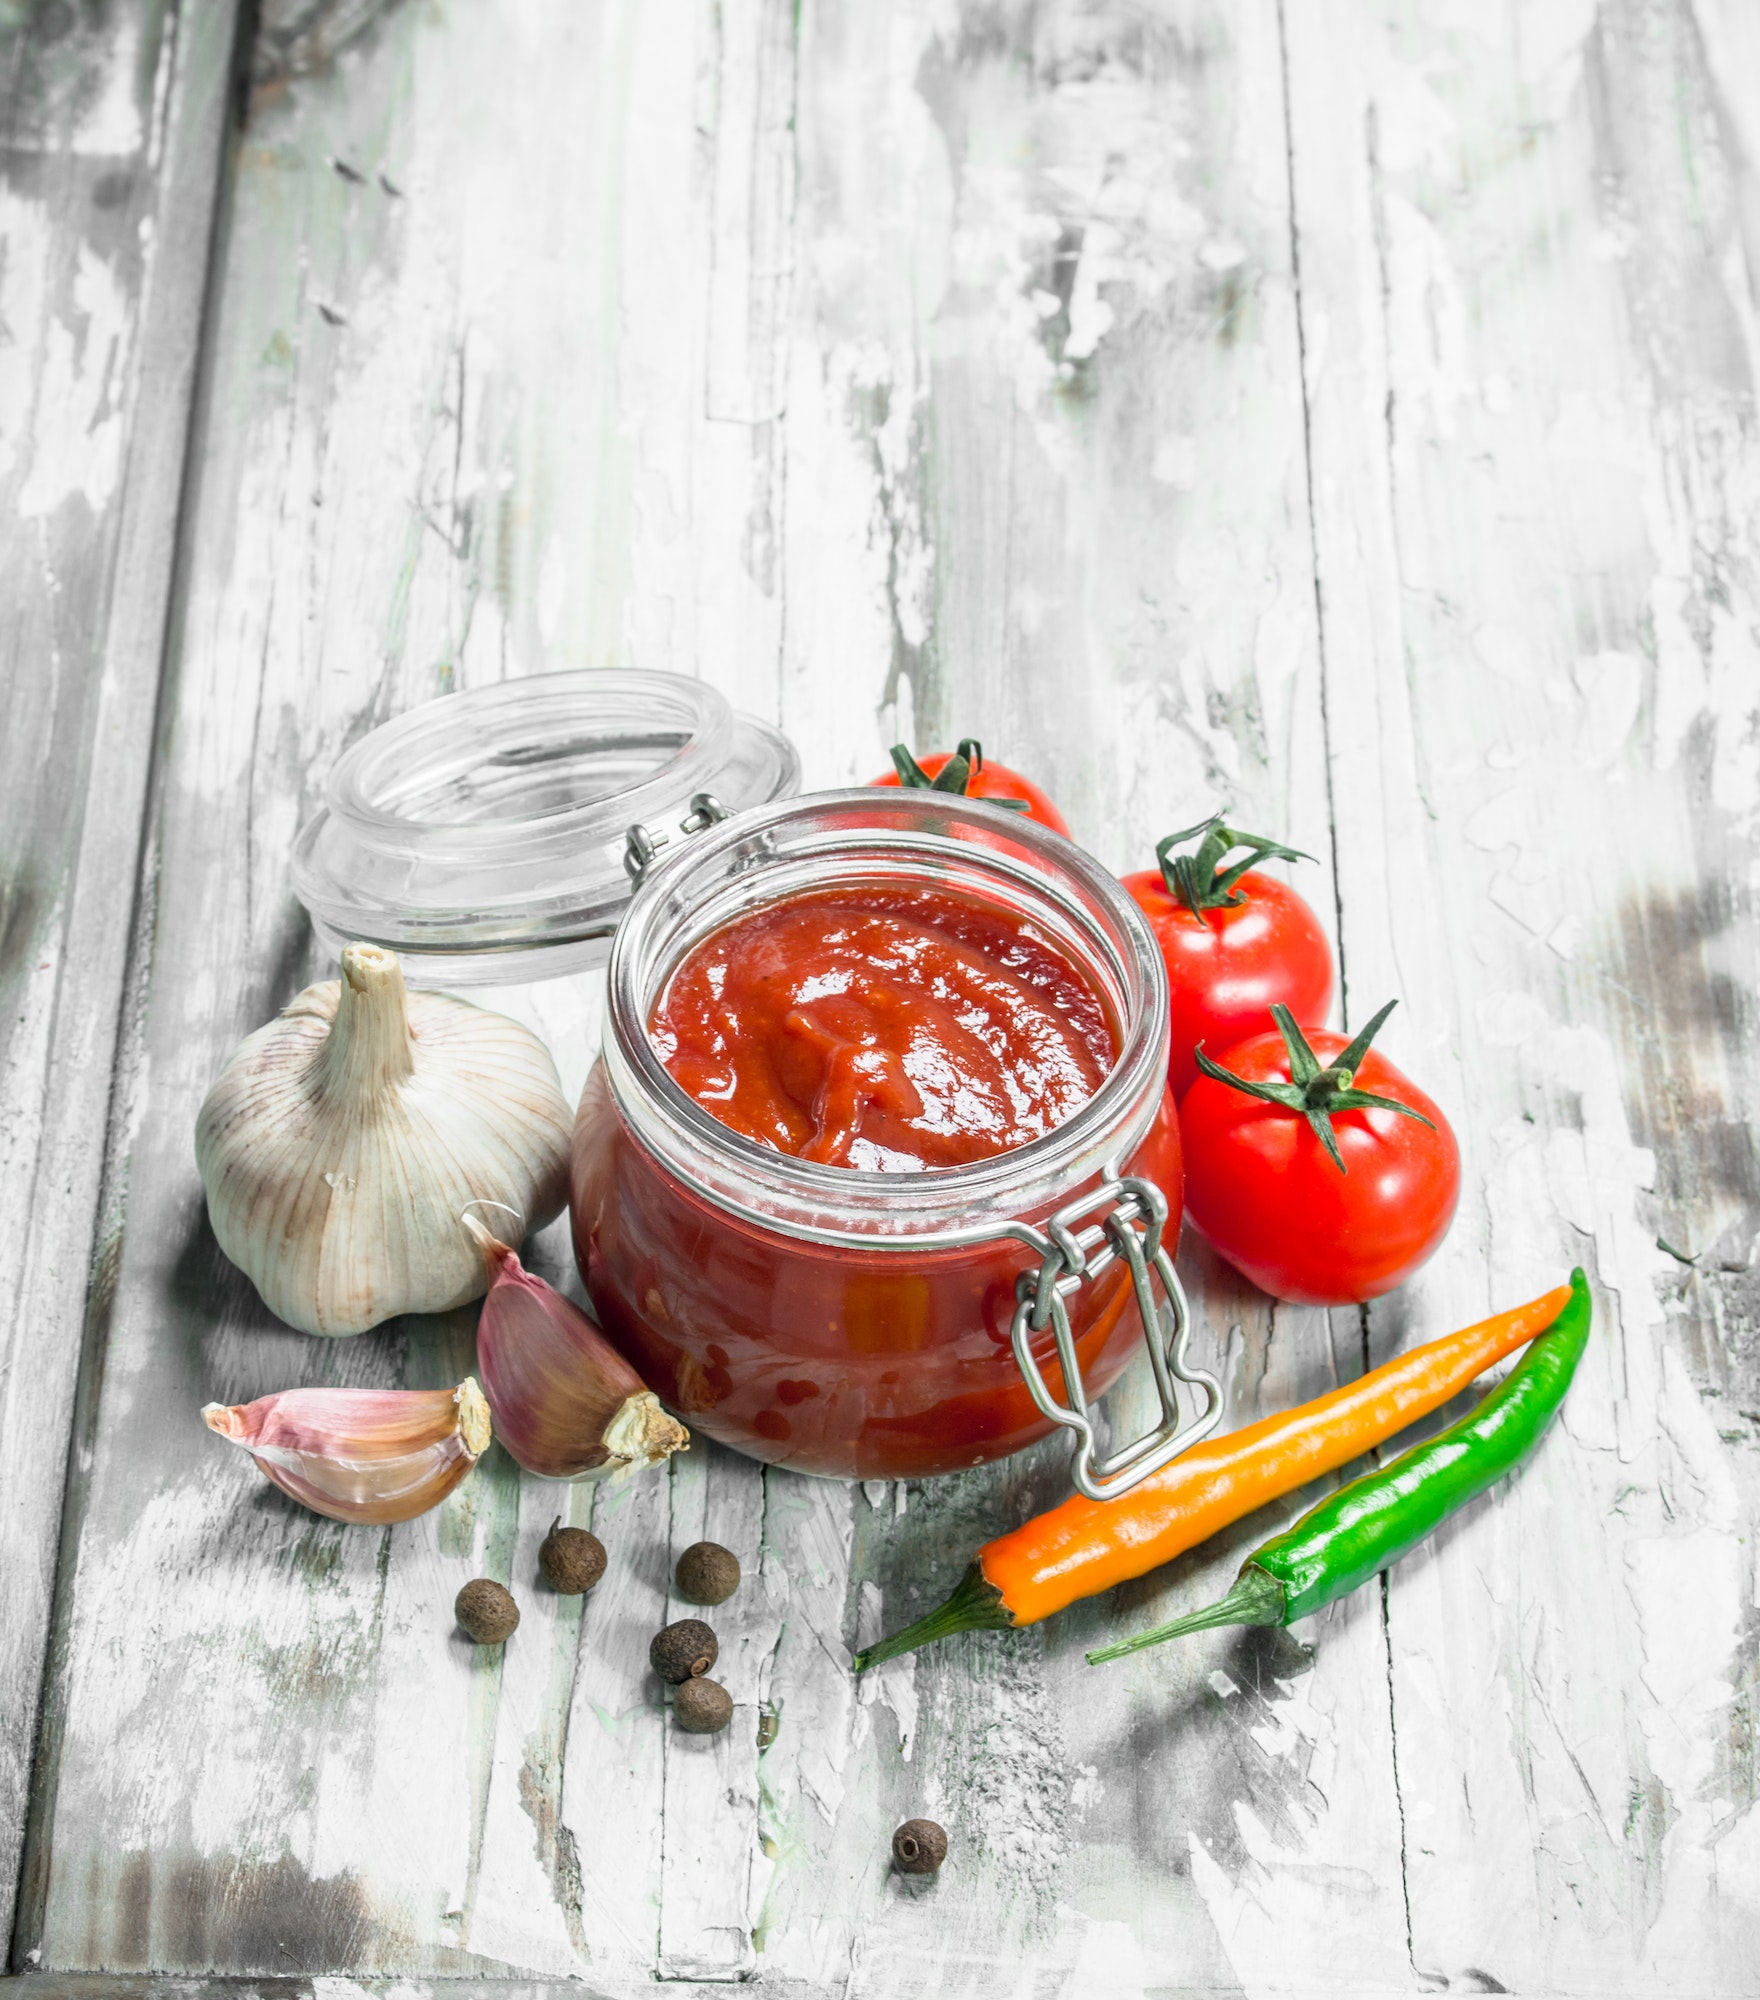 Tomato sauce in a jar and spices.